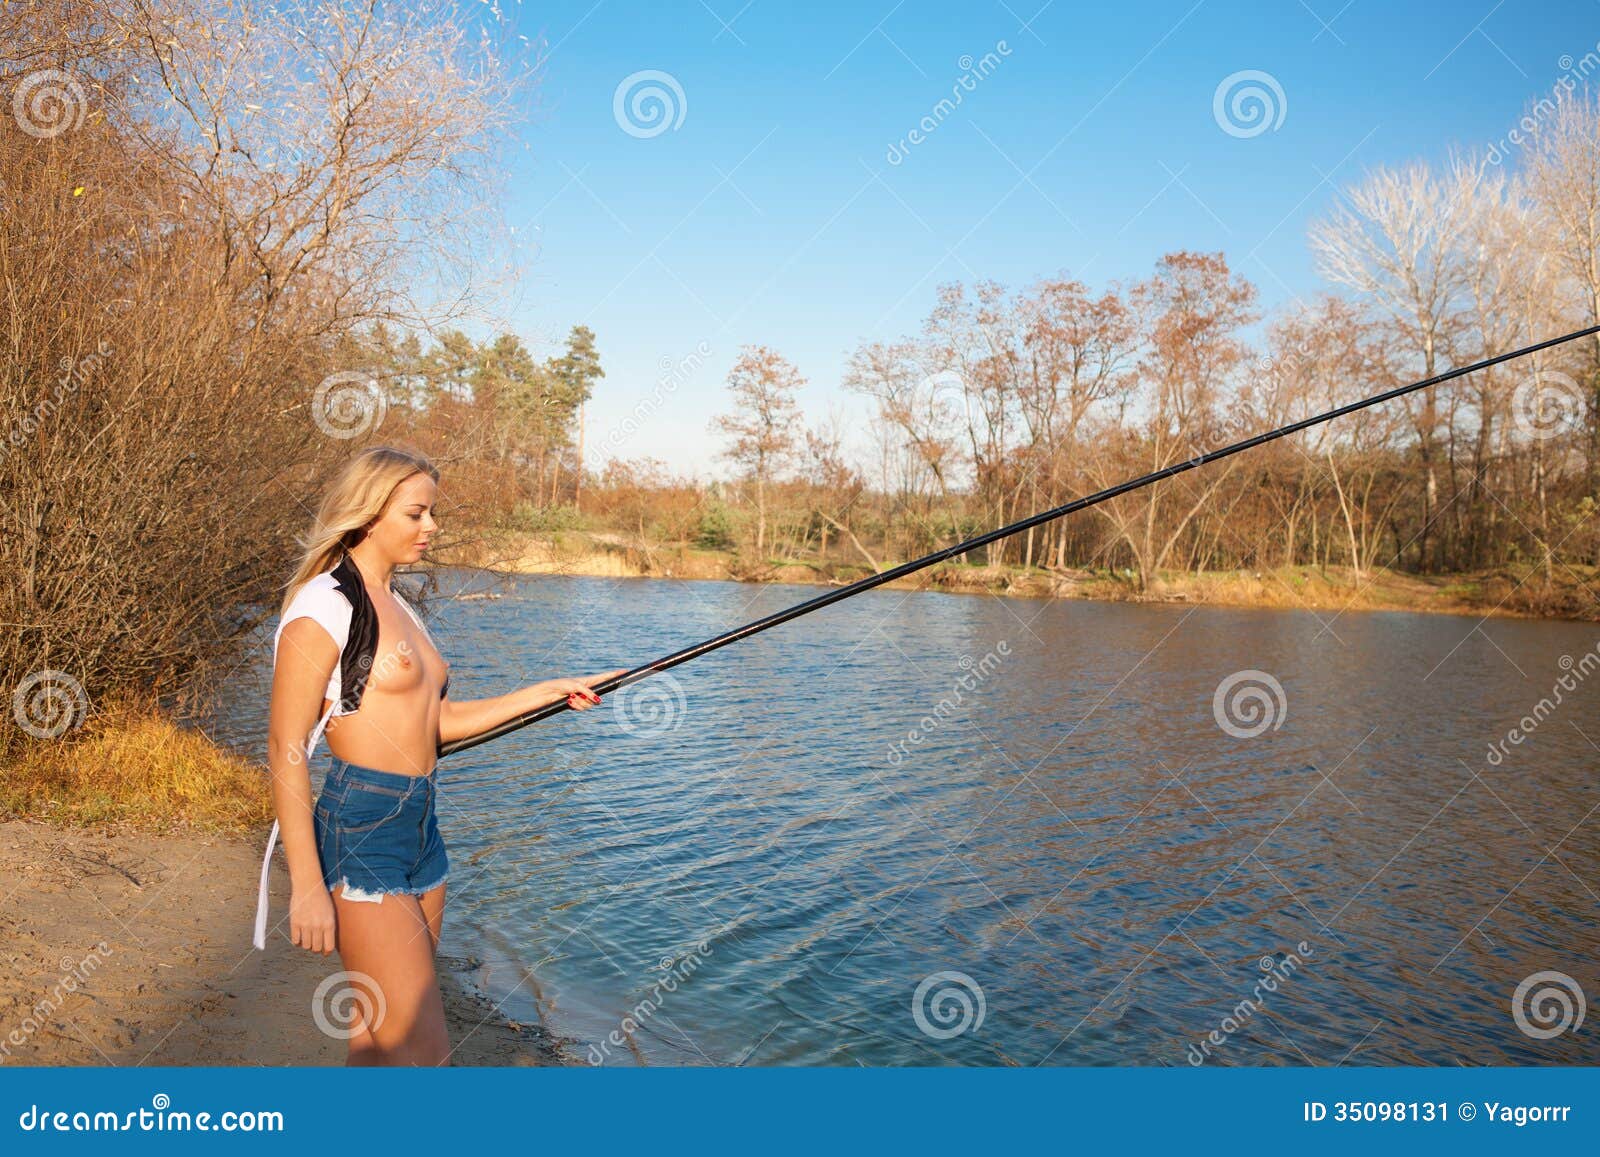 Topless Girl Fishing at the River Stock Image - Image of sunset, beautiful:  35098131